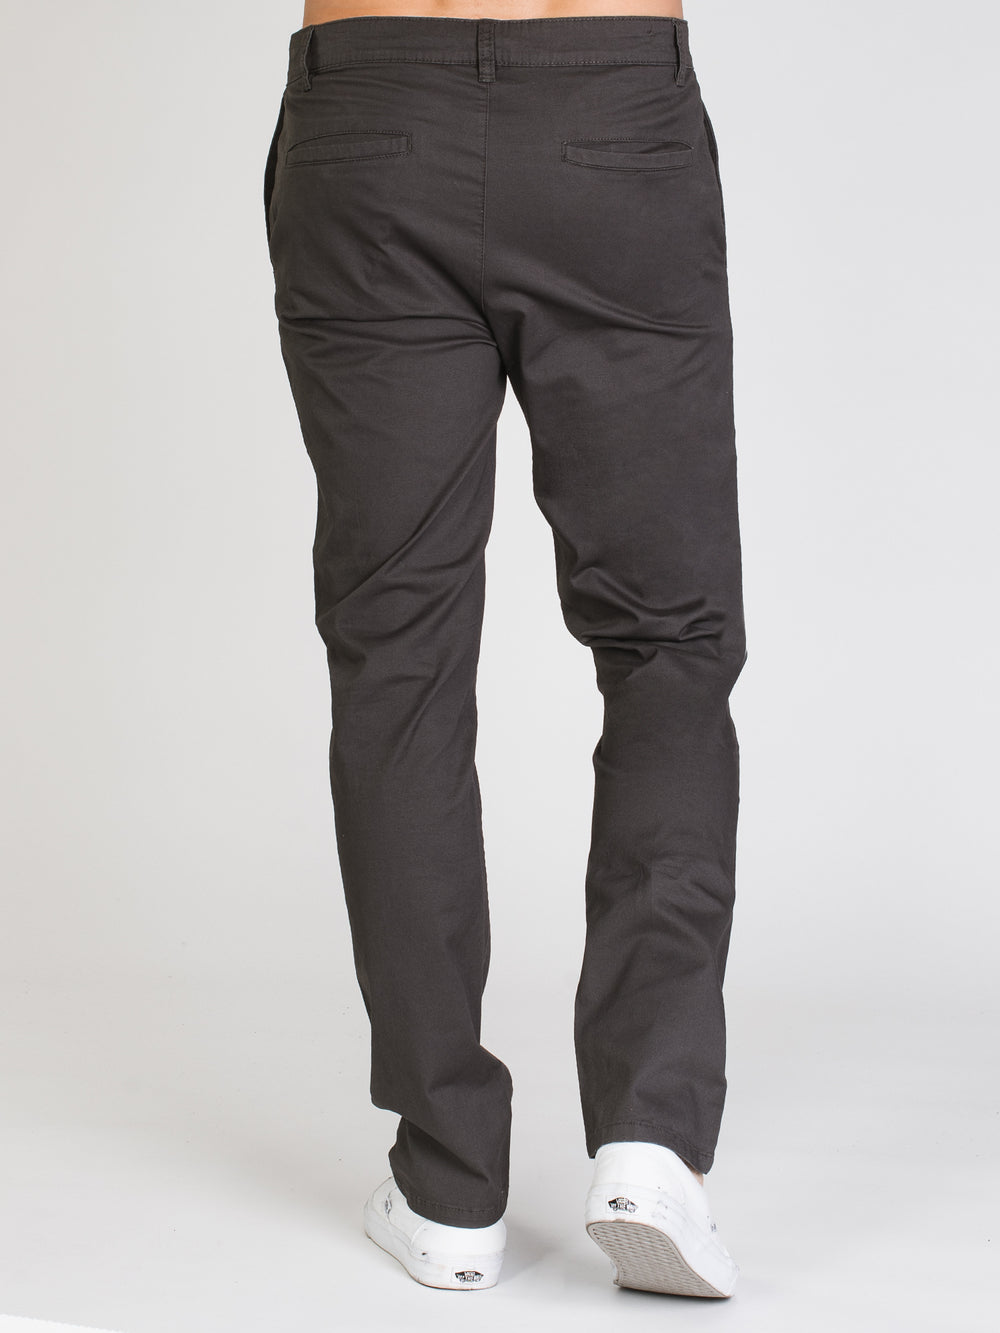 CHINO SLIM TAINTED - CHARCOAL - DÉSTOCKAGE